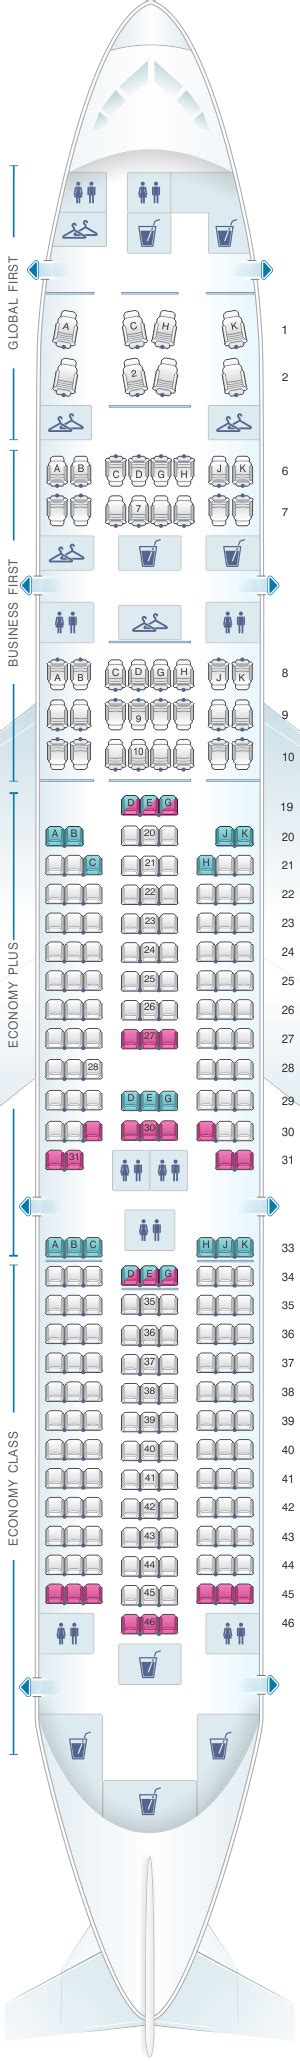 View Boeing 777-200 seating and specifications on United aircraft using this United Airlines seating chart. Currently in New Zealand Dollar | English version, ... Boeing 777-200 (777) Version 1 (50/24/202) ... Version 4 (32/330) Seat map (50/24/202) Interior specifications. Aircraft Specifications; Interior elements United Polaris .... 